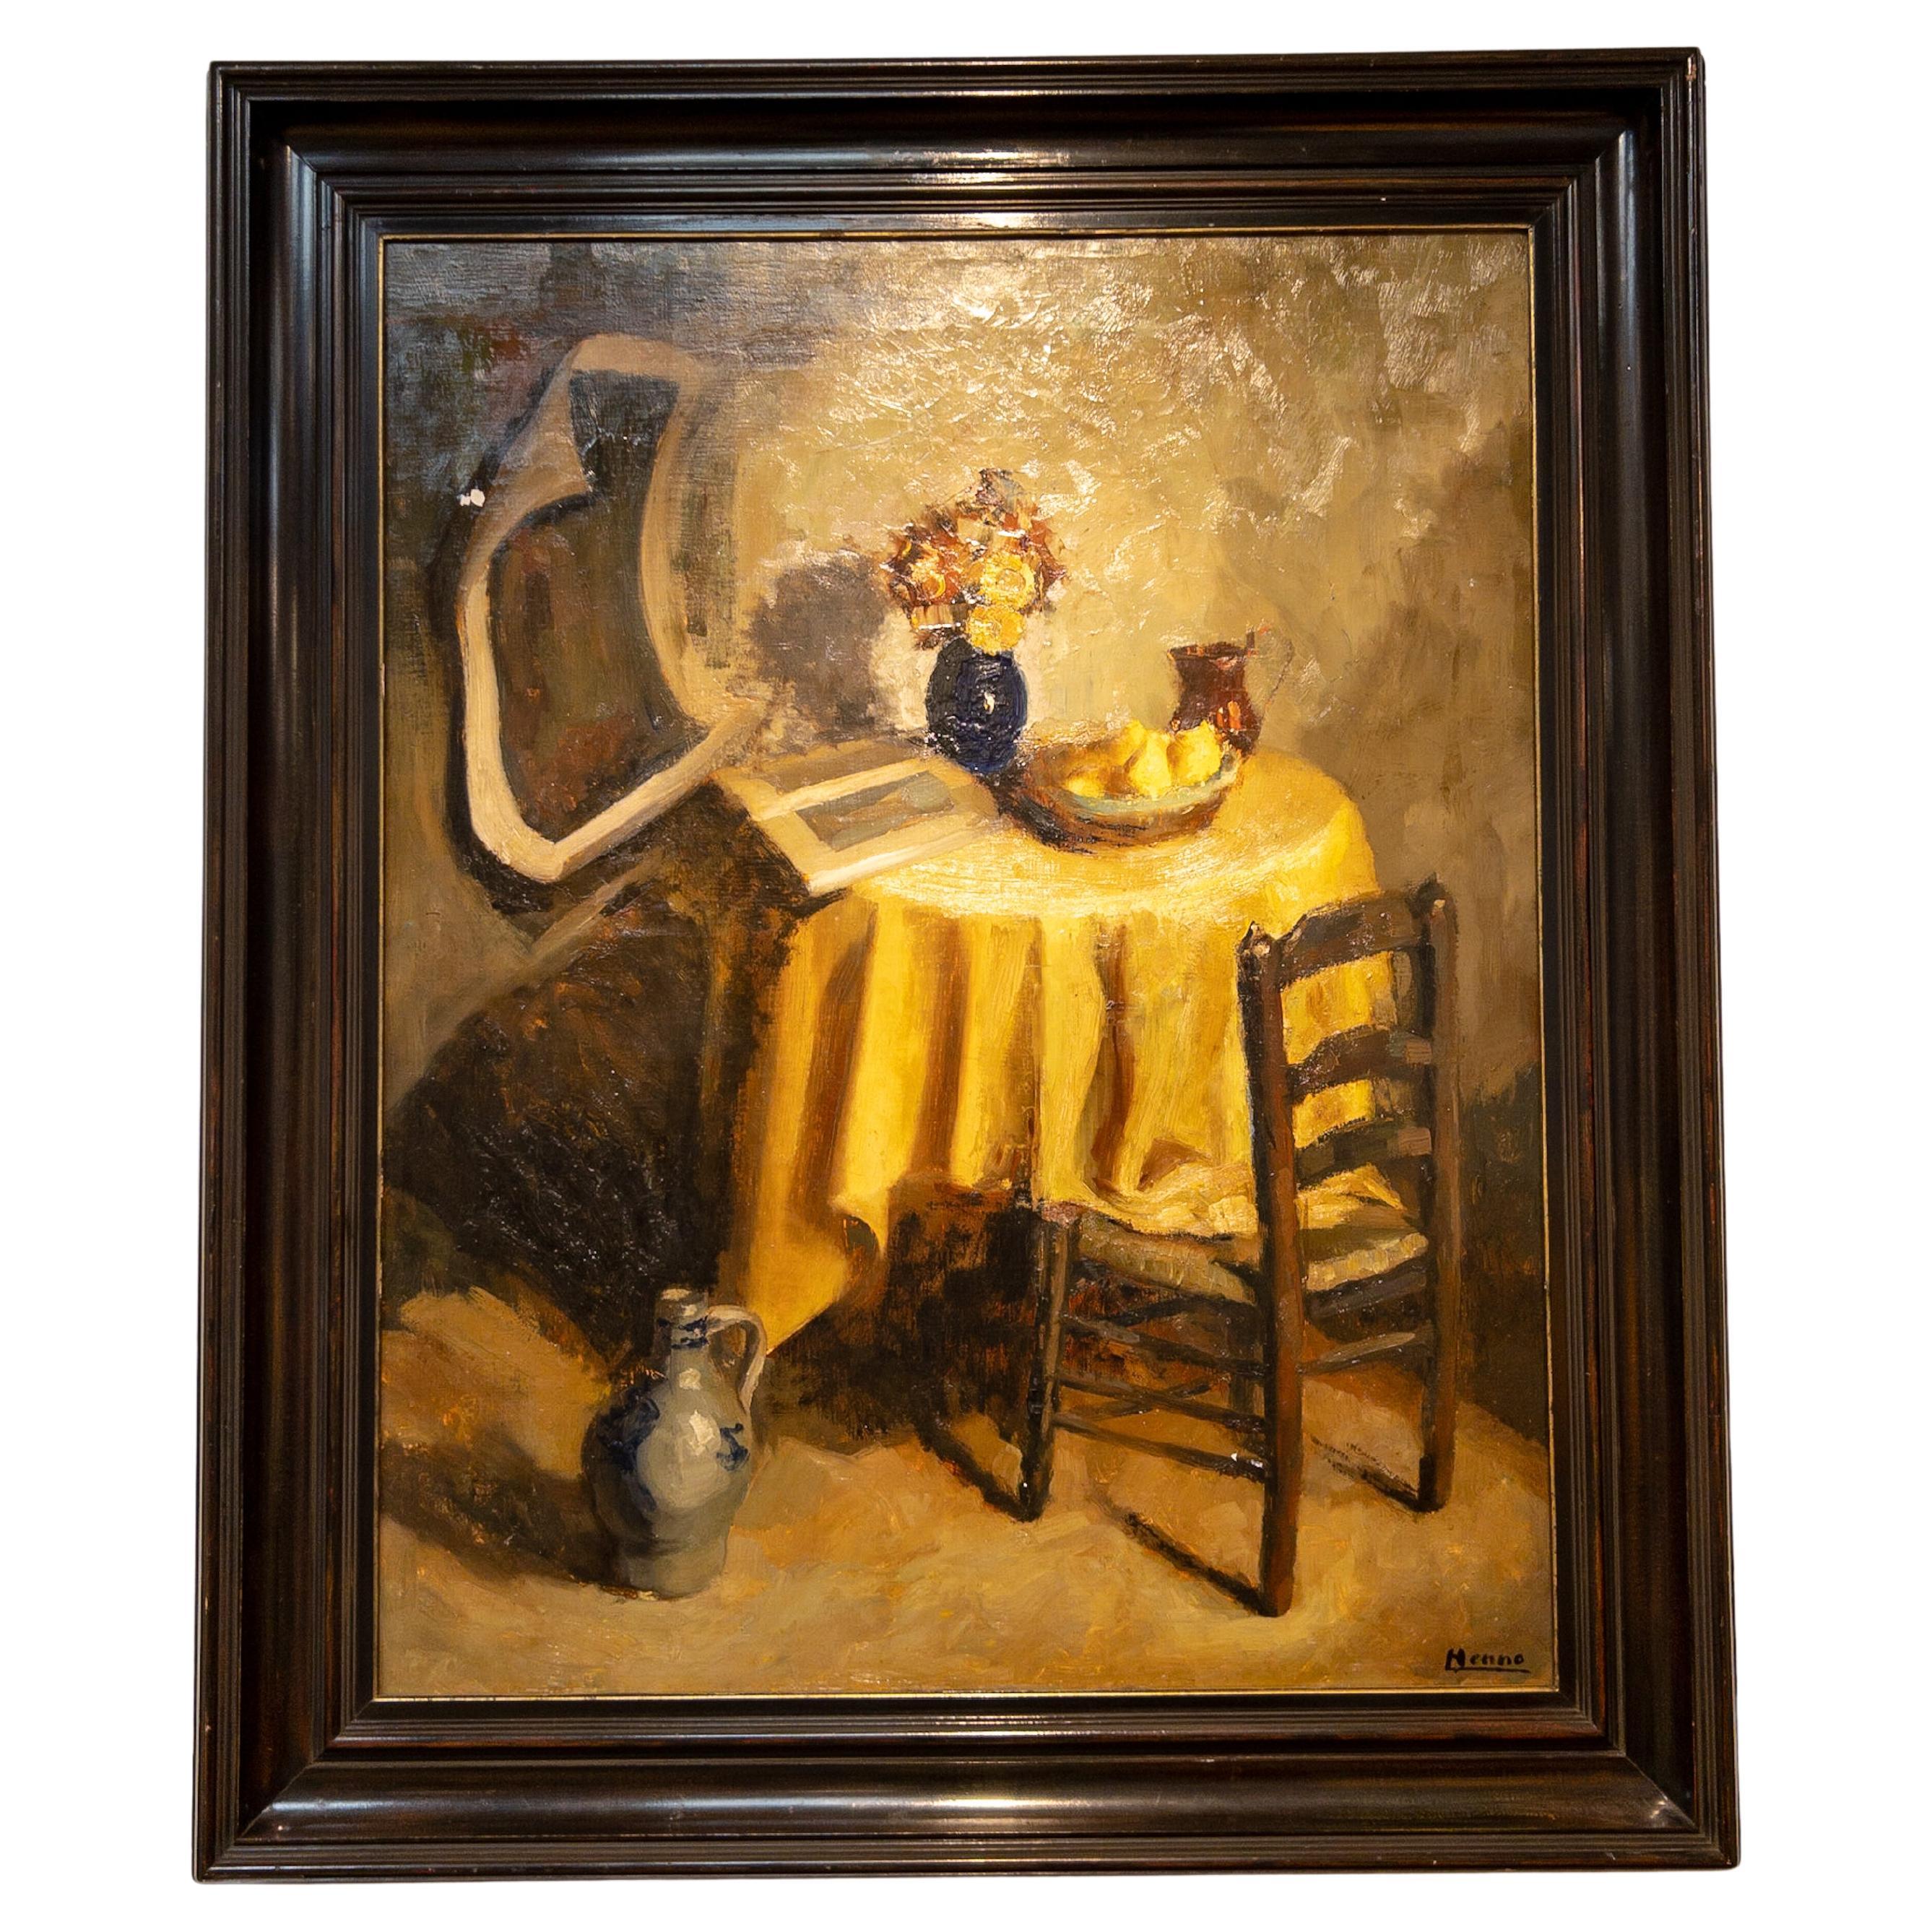 1940’s French Oil on Canvas Signed “Henno” For Sale